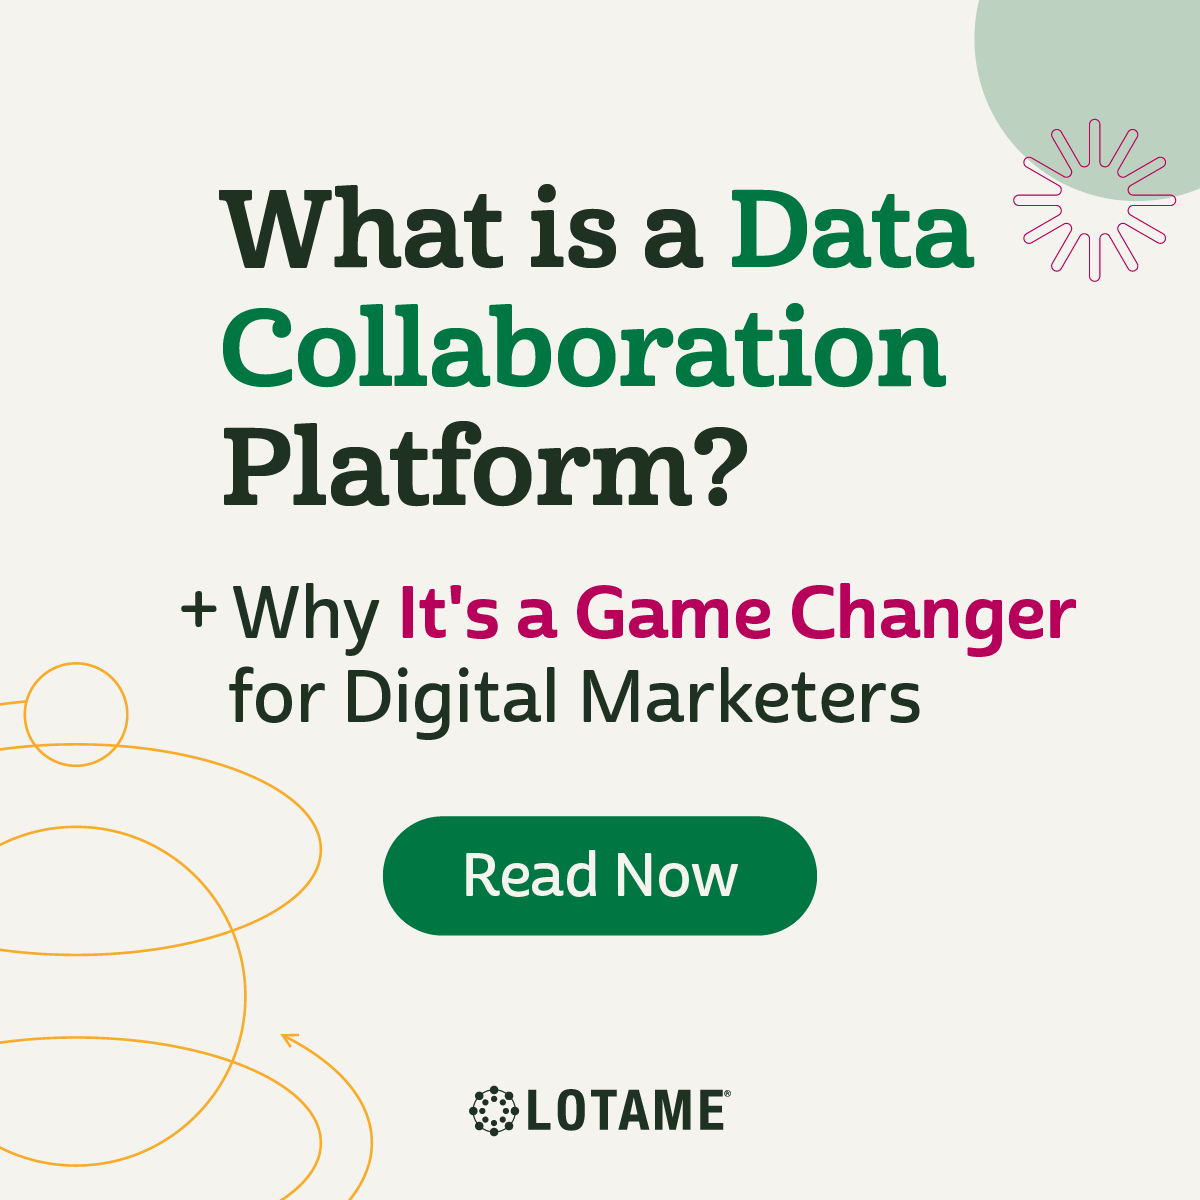 We've been talking a lot about #datacollaboration lately. But what exactly is it? What does a data collaboration platform do? 

Glad you asked! Get all the answers you need below 👇

bit.ly/4432rri